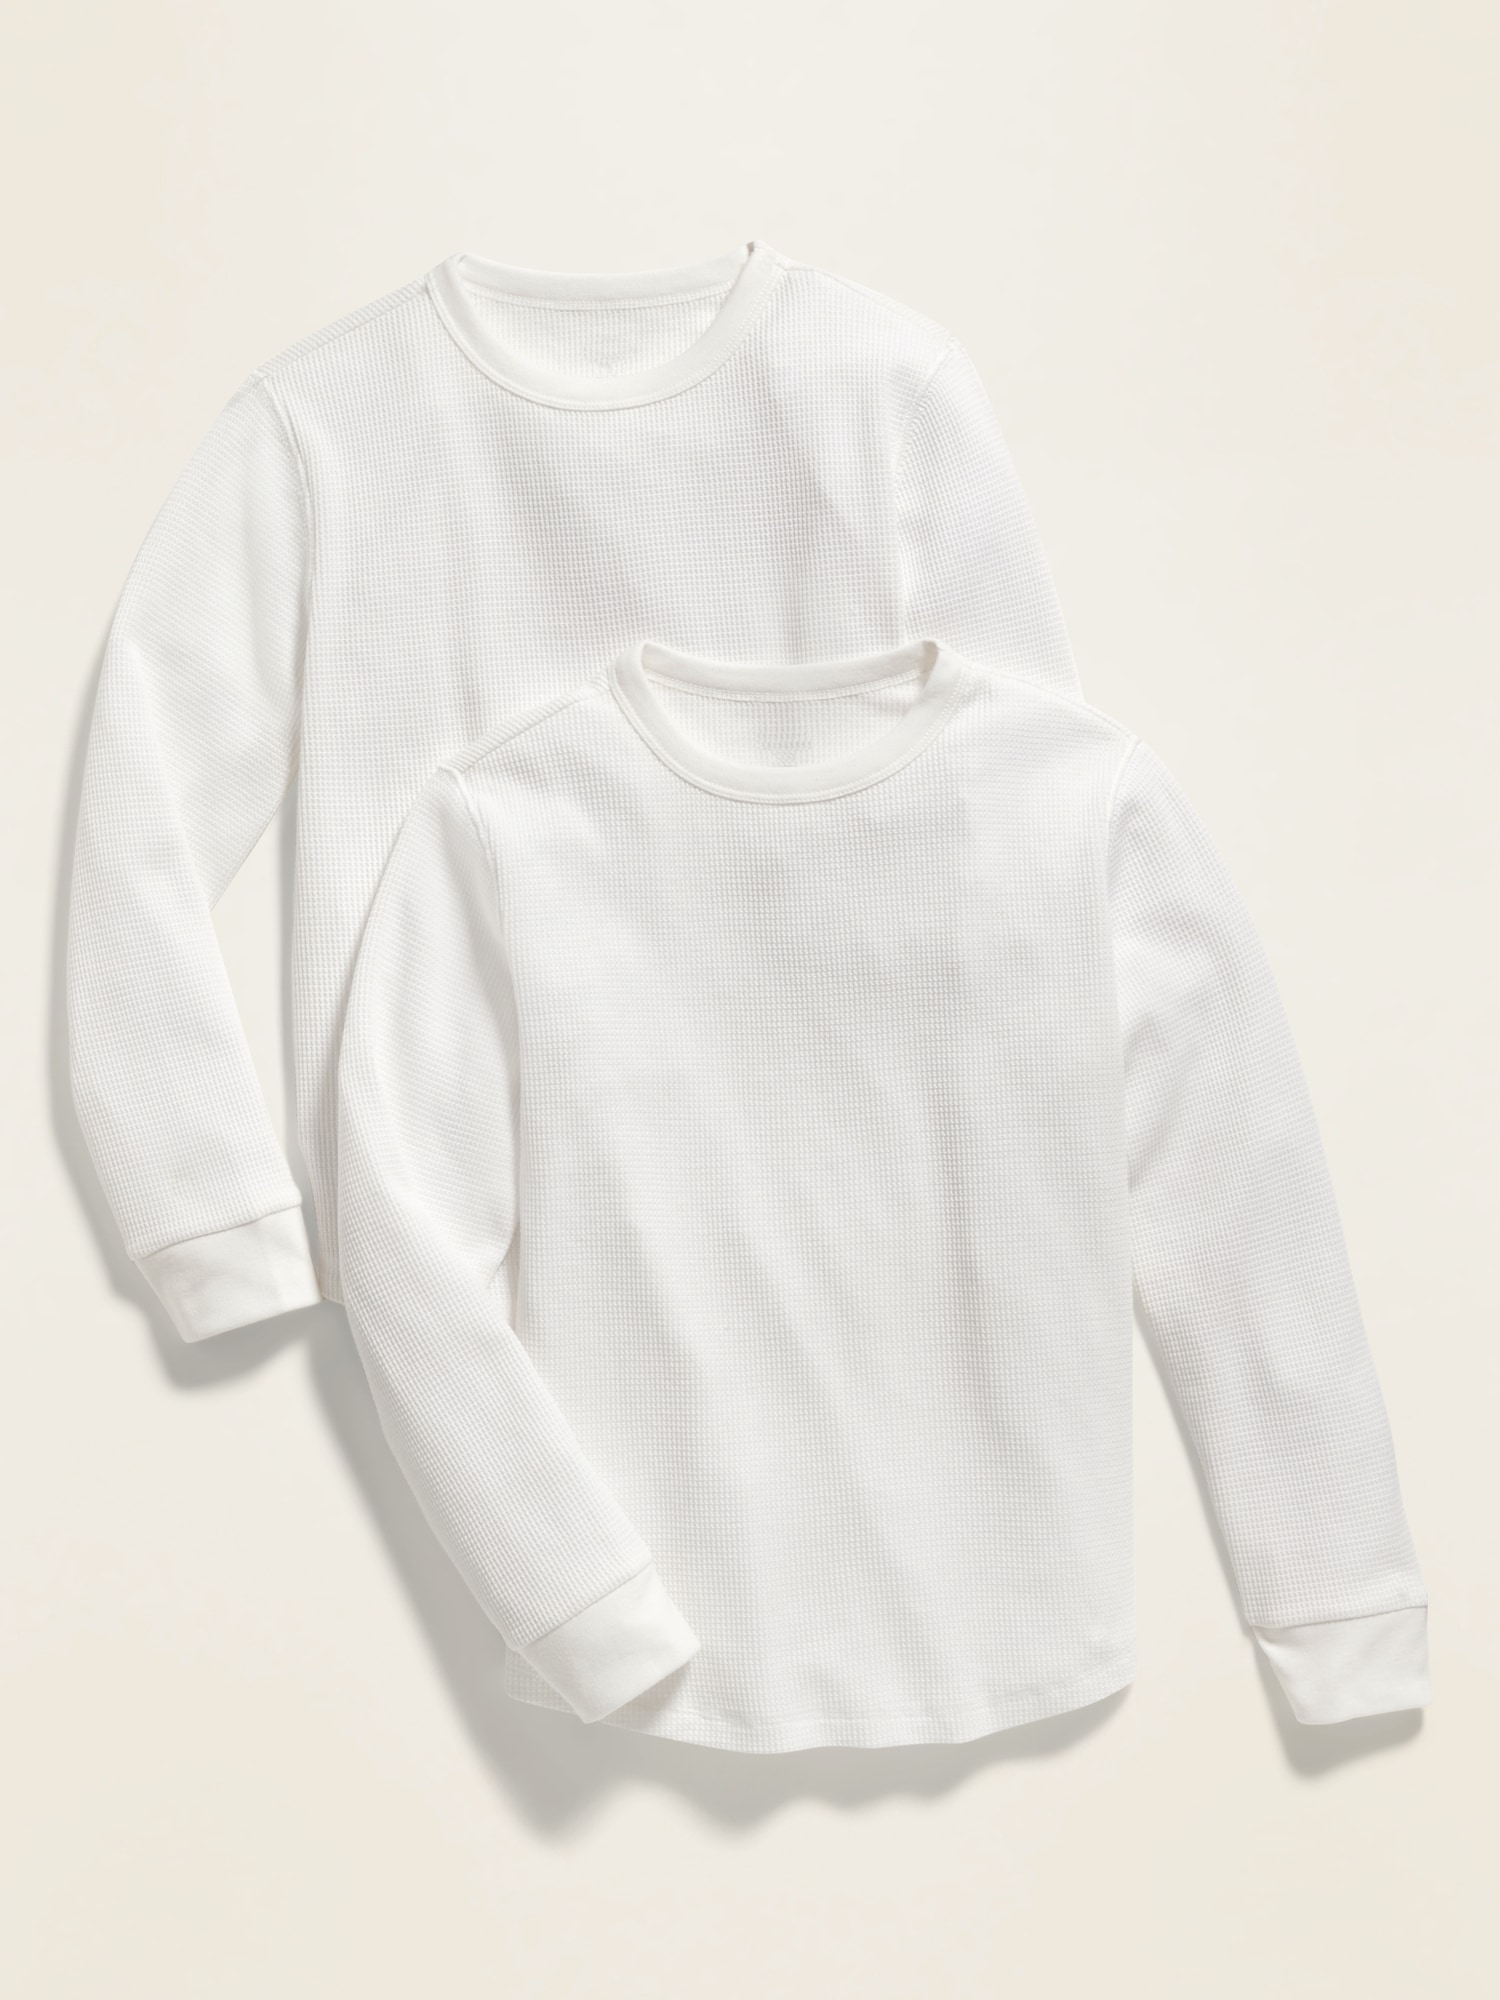 Thermal-Knit Long-Sleeve Tee 2-Pack for Boys